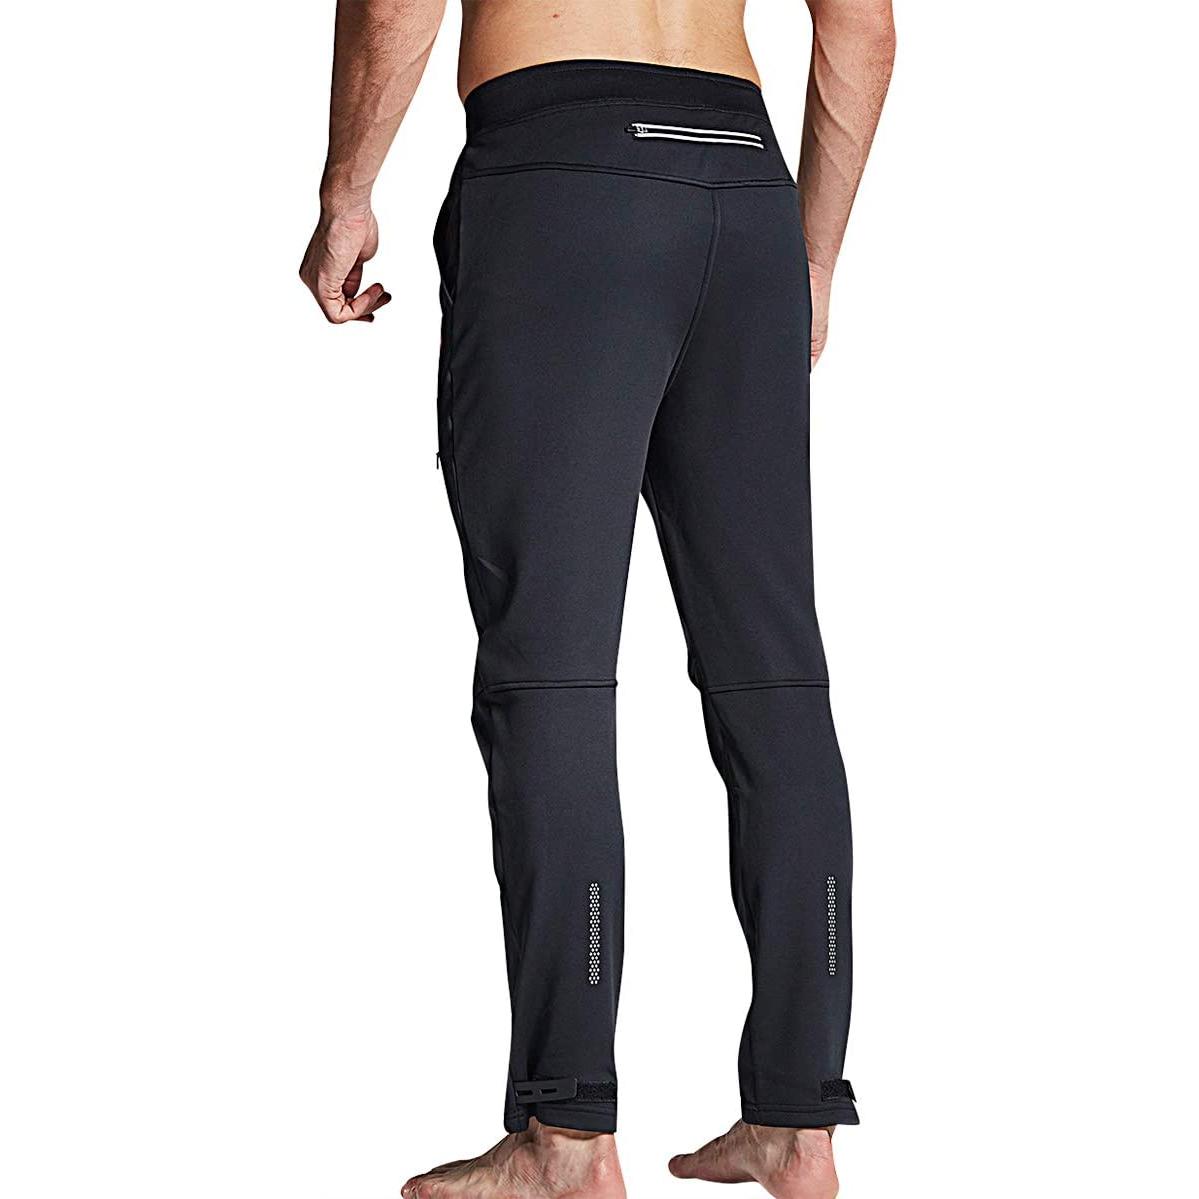 Men's Winter Cycling Pants - Thermal, Windproof & Water-Resistant